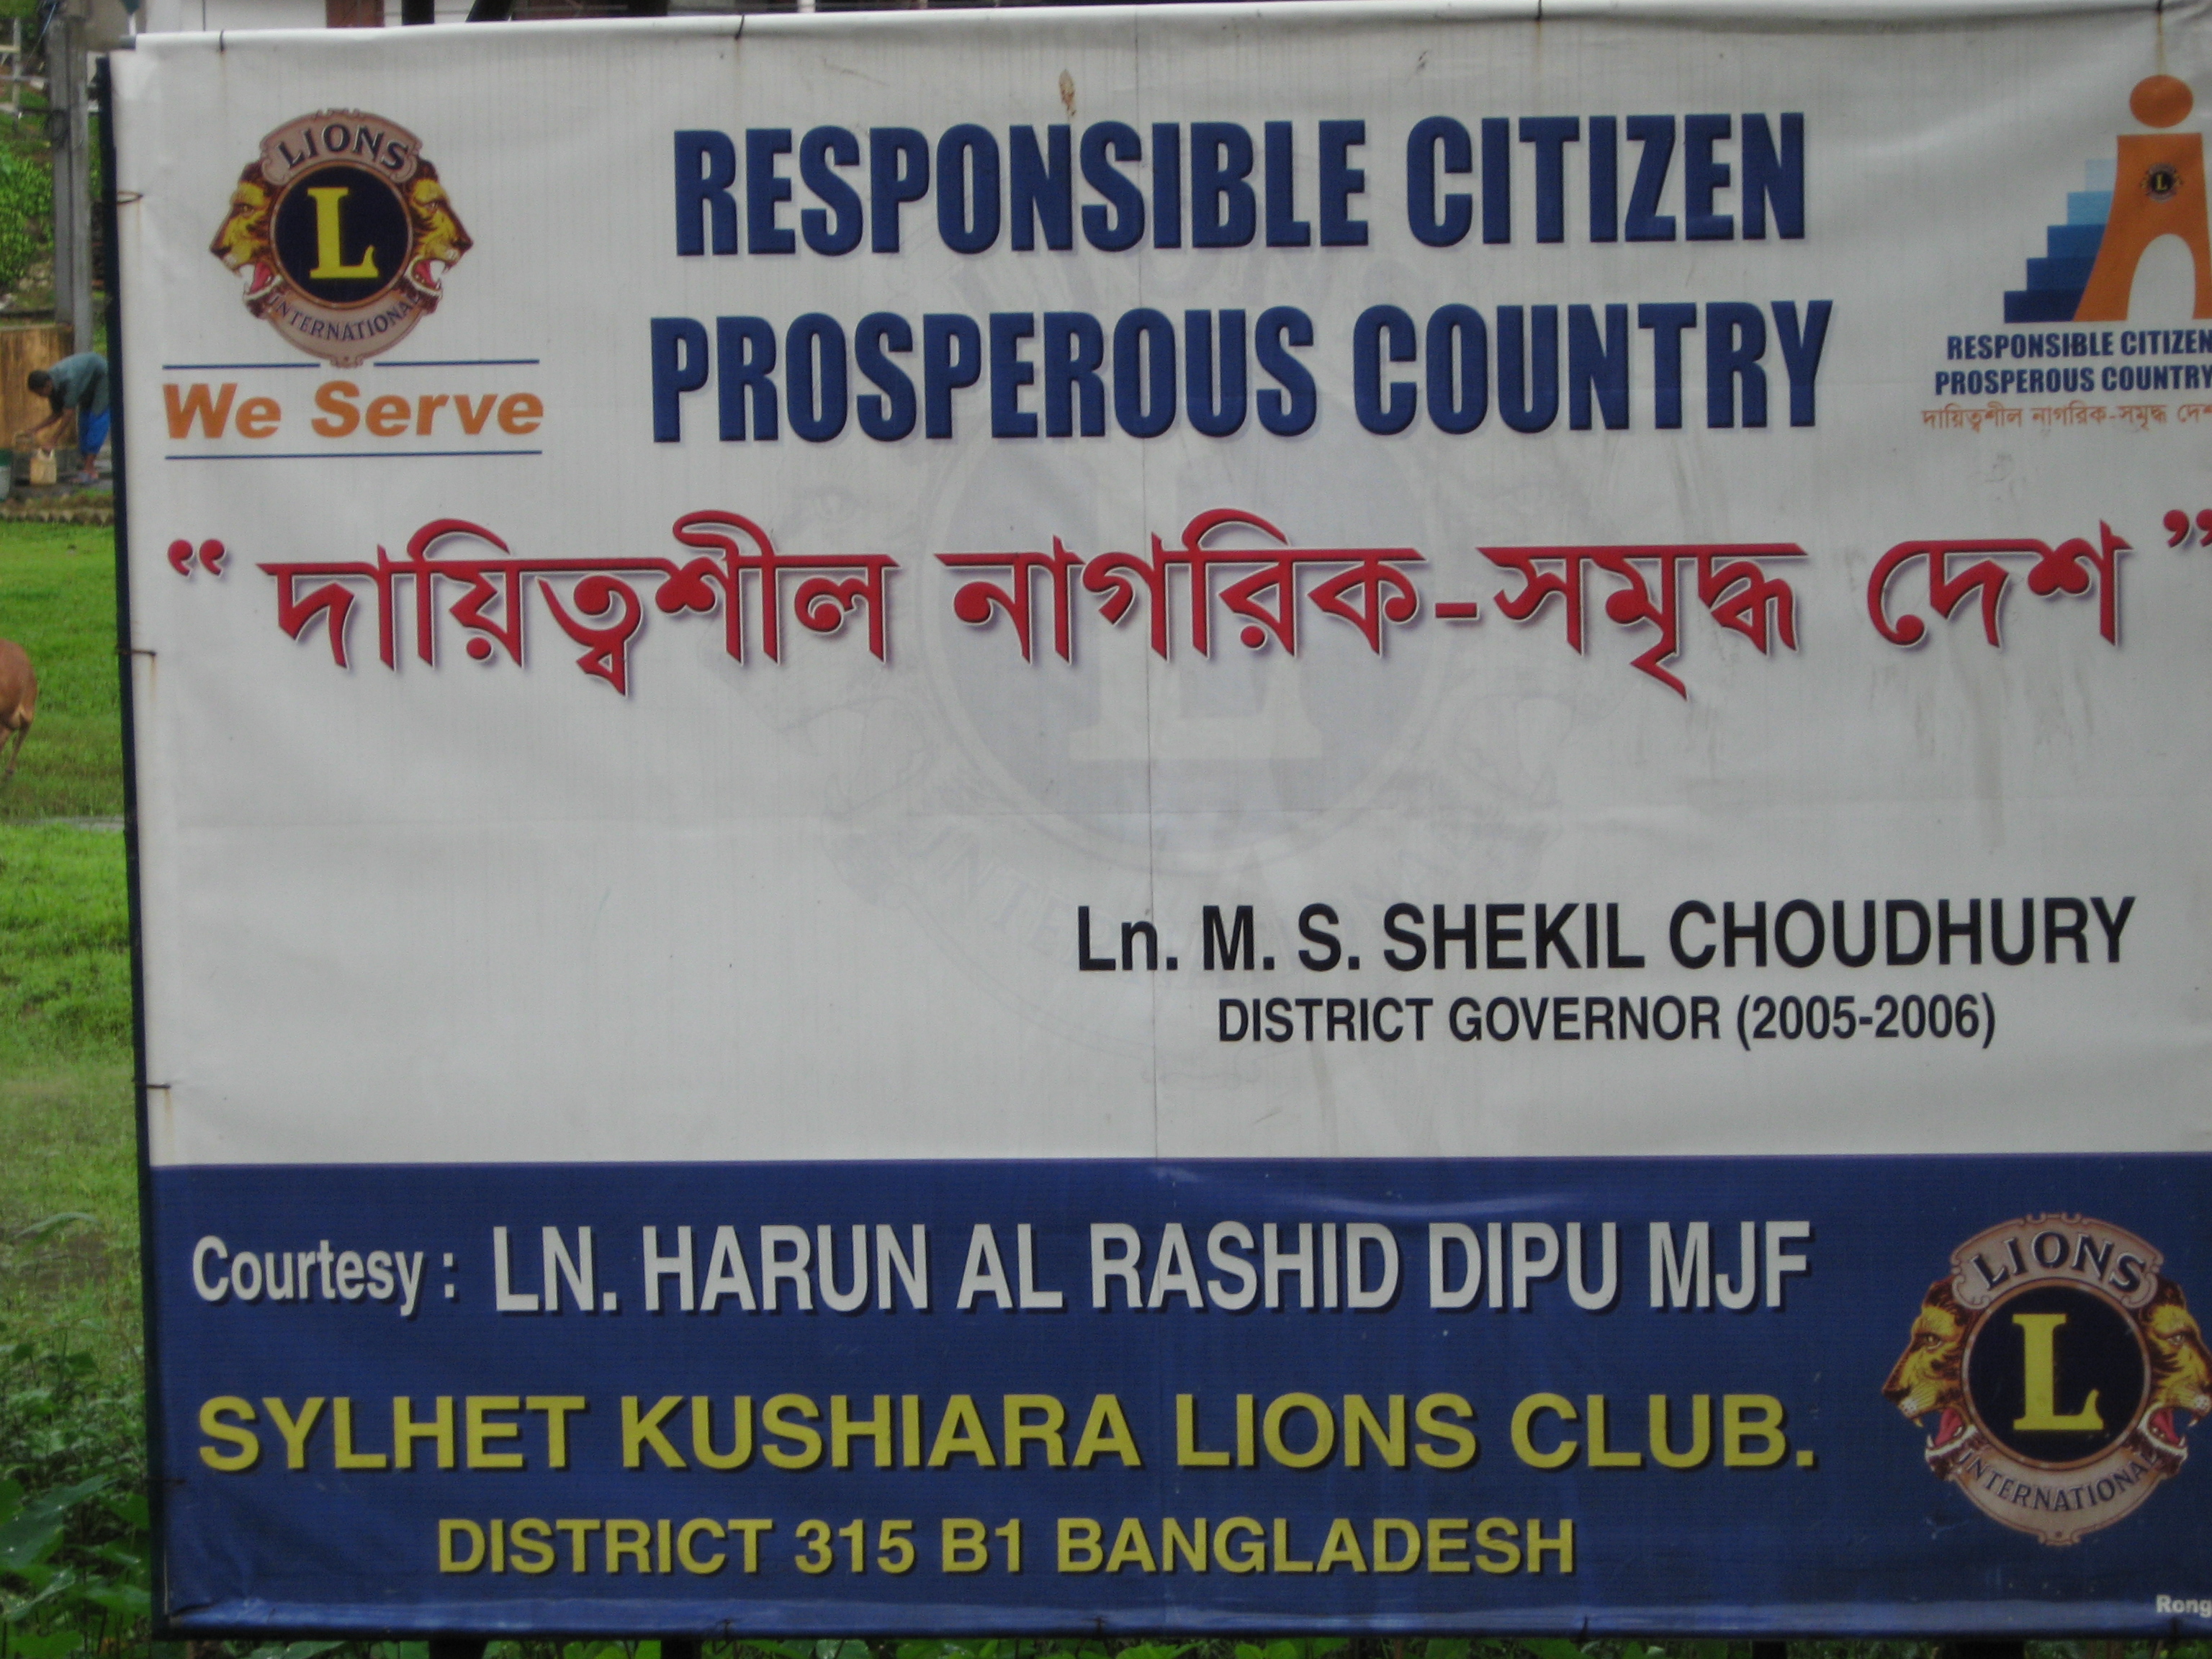 A sign promoting responsible citizenship 